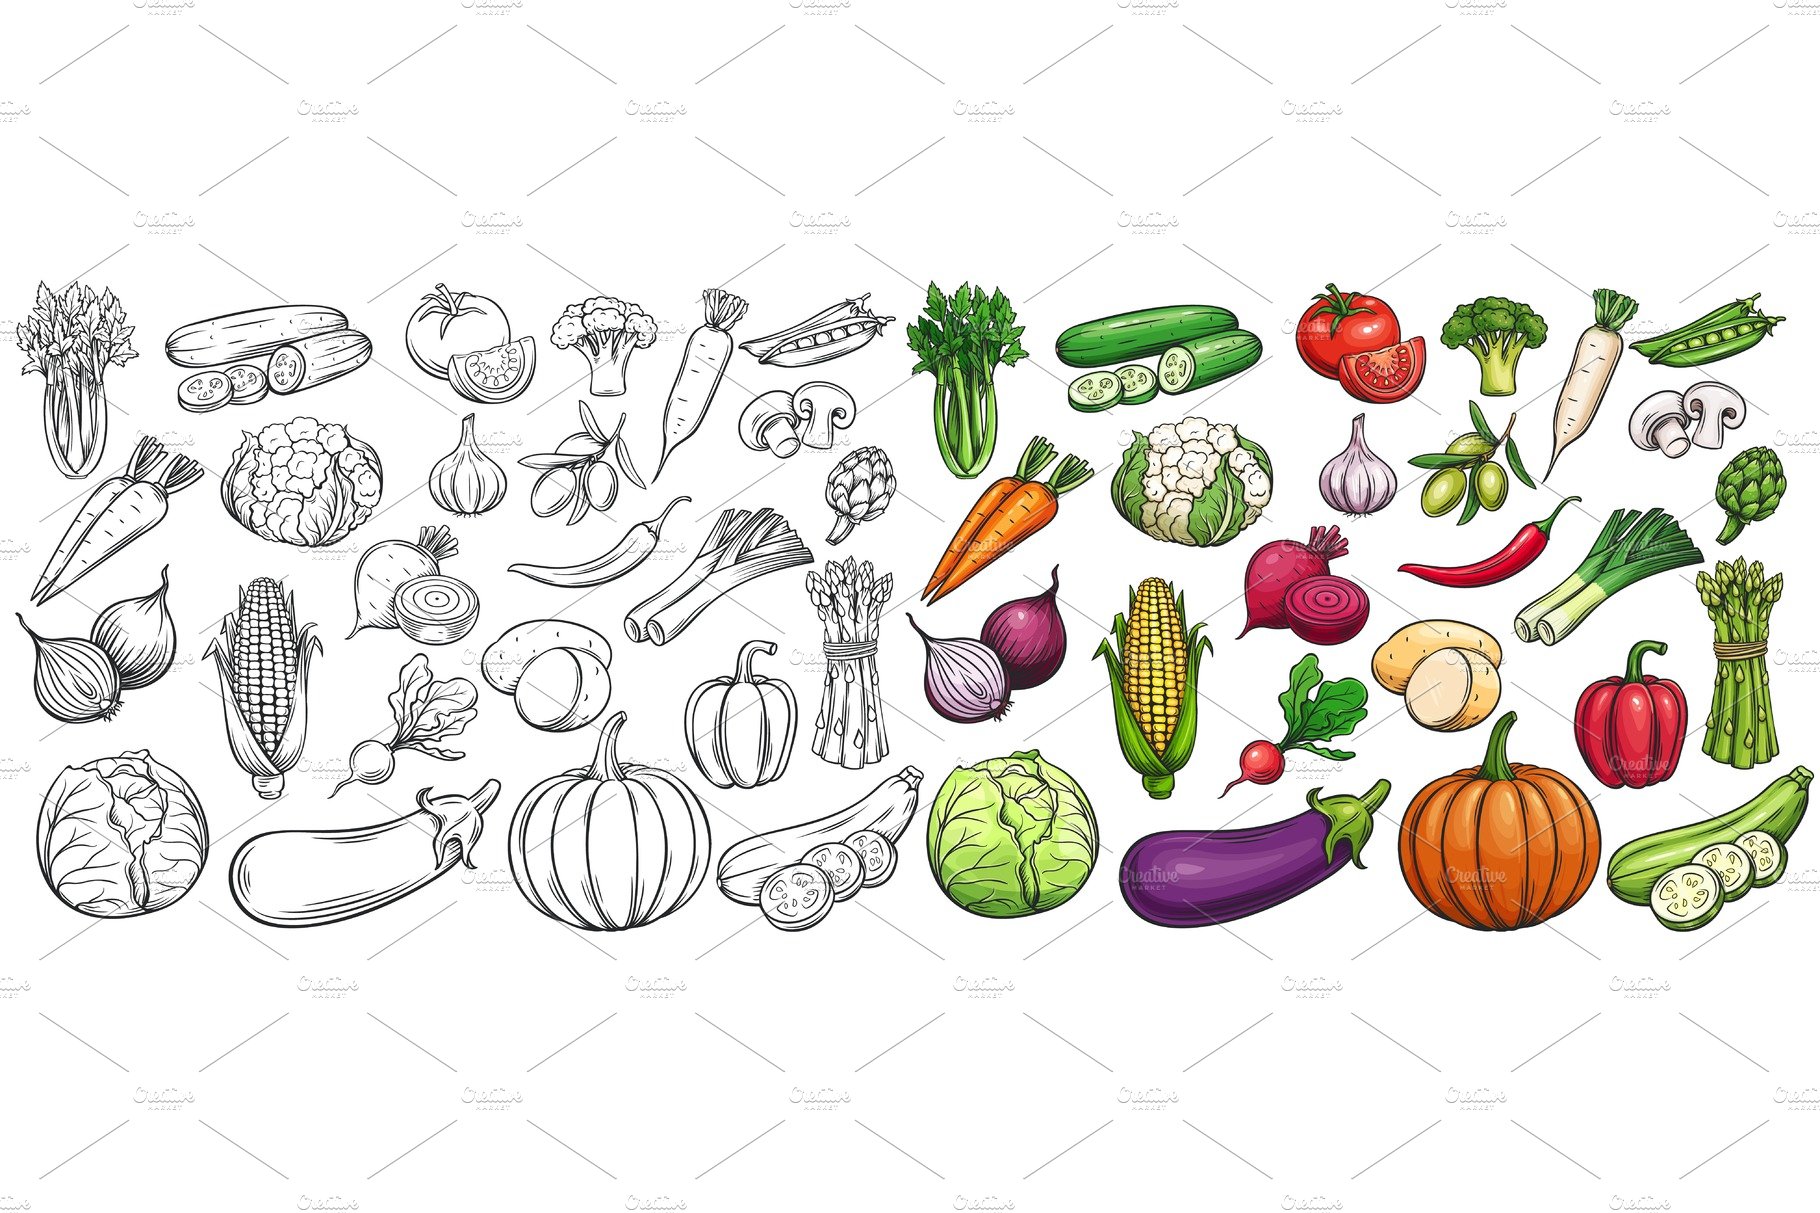 Vegetables Icons Set cover image.